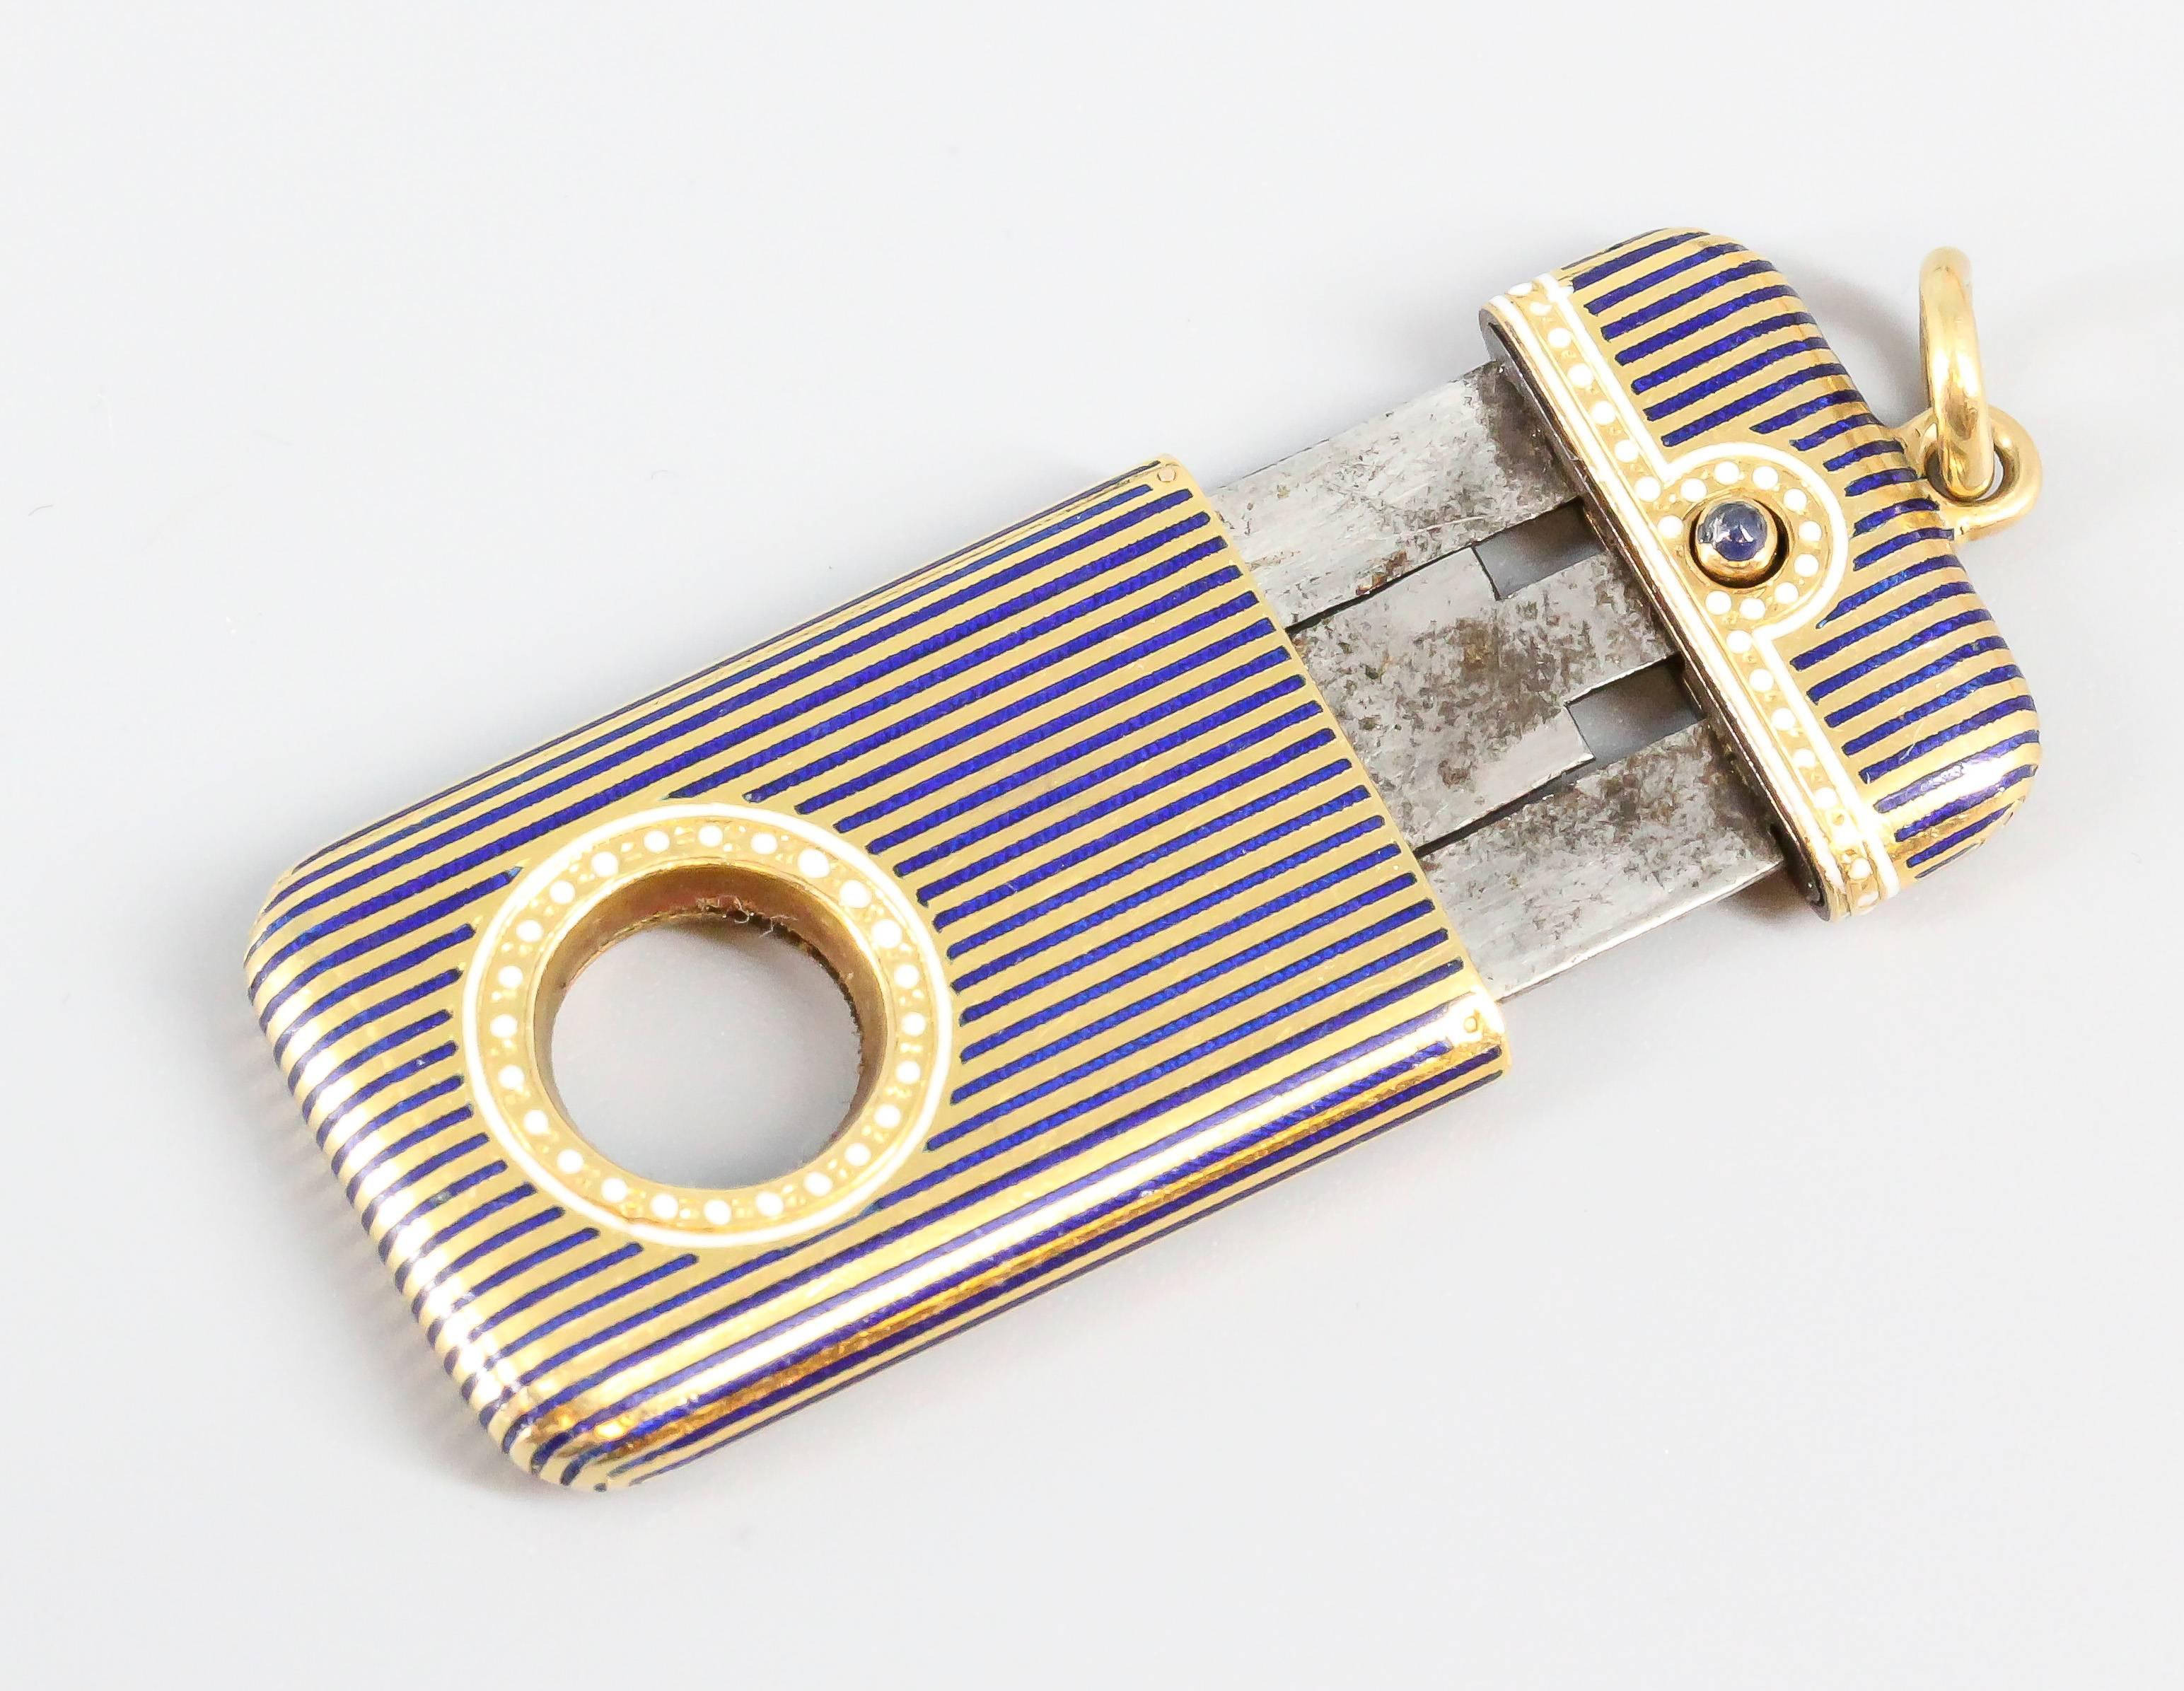 Rare and unusual blue sapphire, enamel and 18K yellow gold cigar cutter by Boucheron Paris, circa 1930s. It features a beautifully designed body, with alternating lines of blue enamel and gold with further white enamel accent dots, and with a single